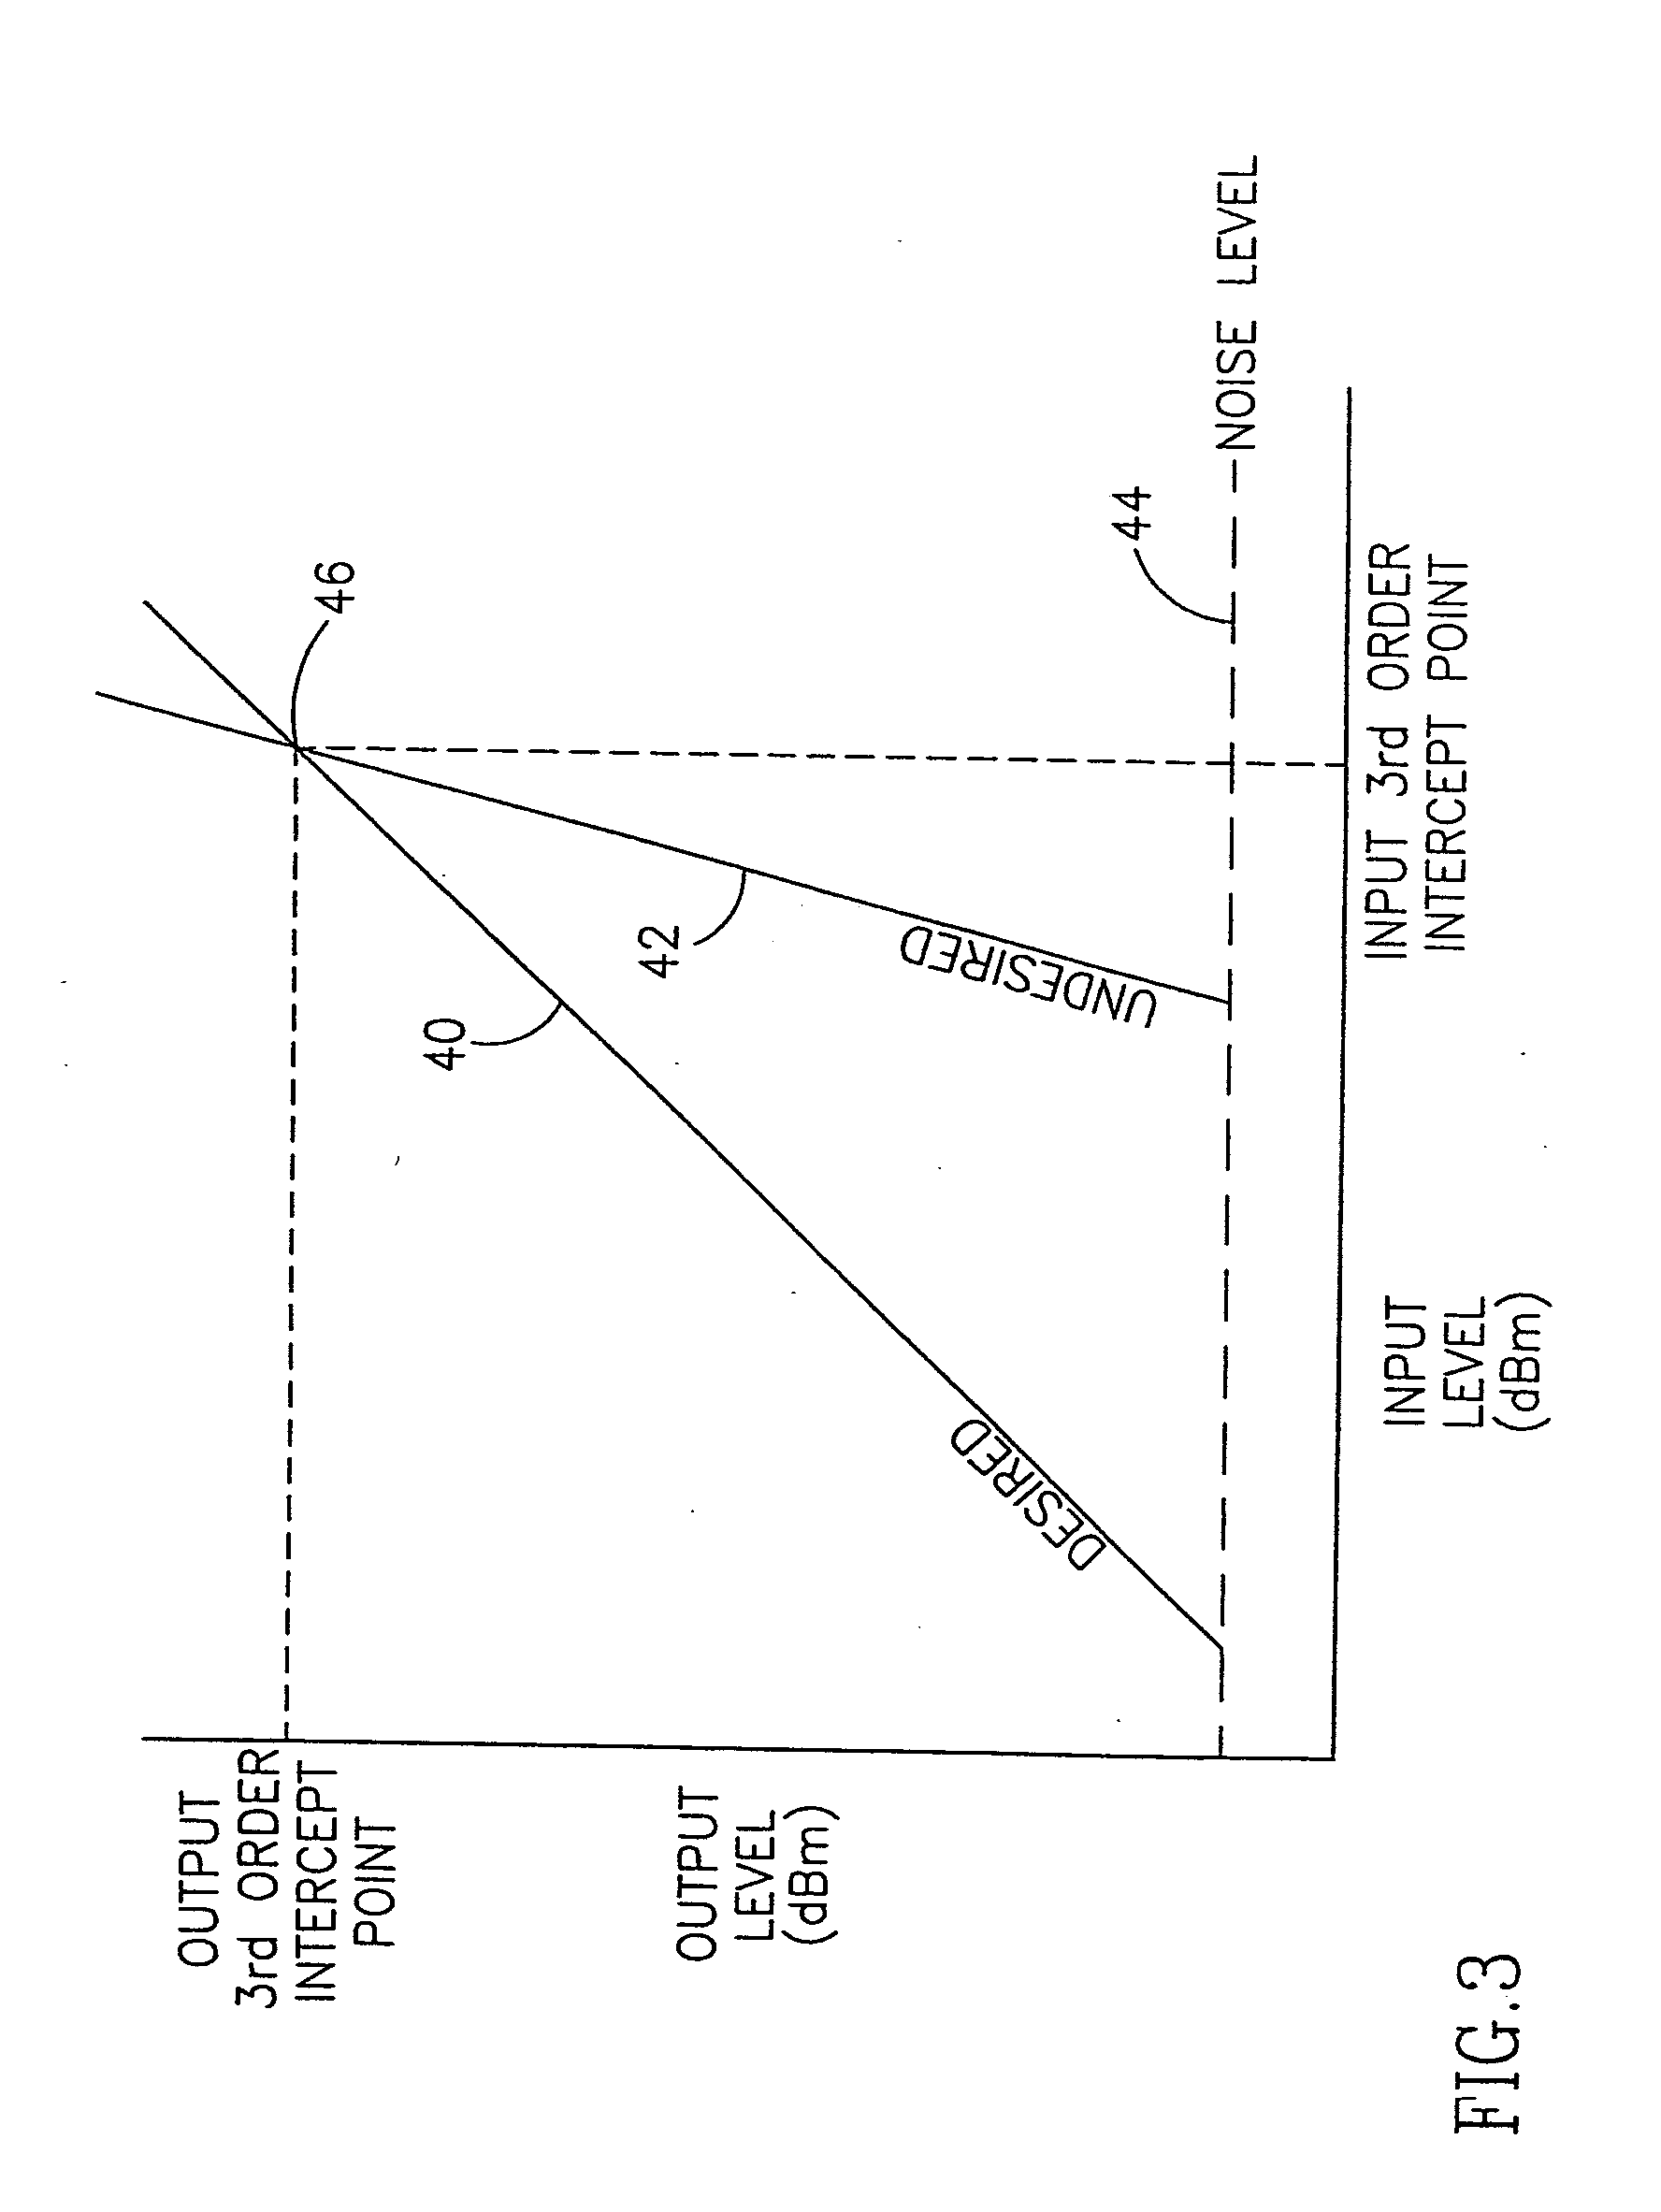 Apparatus for and method of optimizing the performance of a radio frequency receiver in the presence of interference